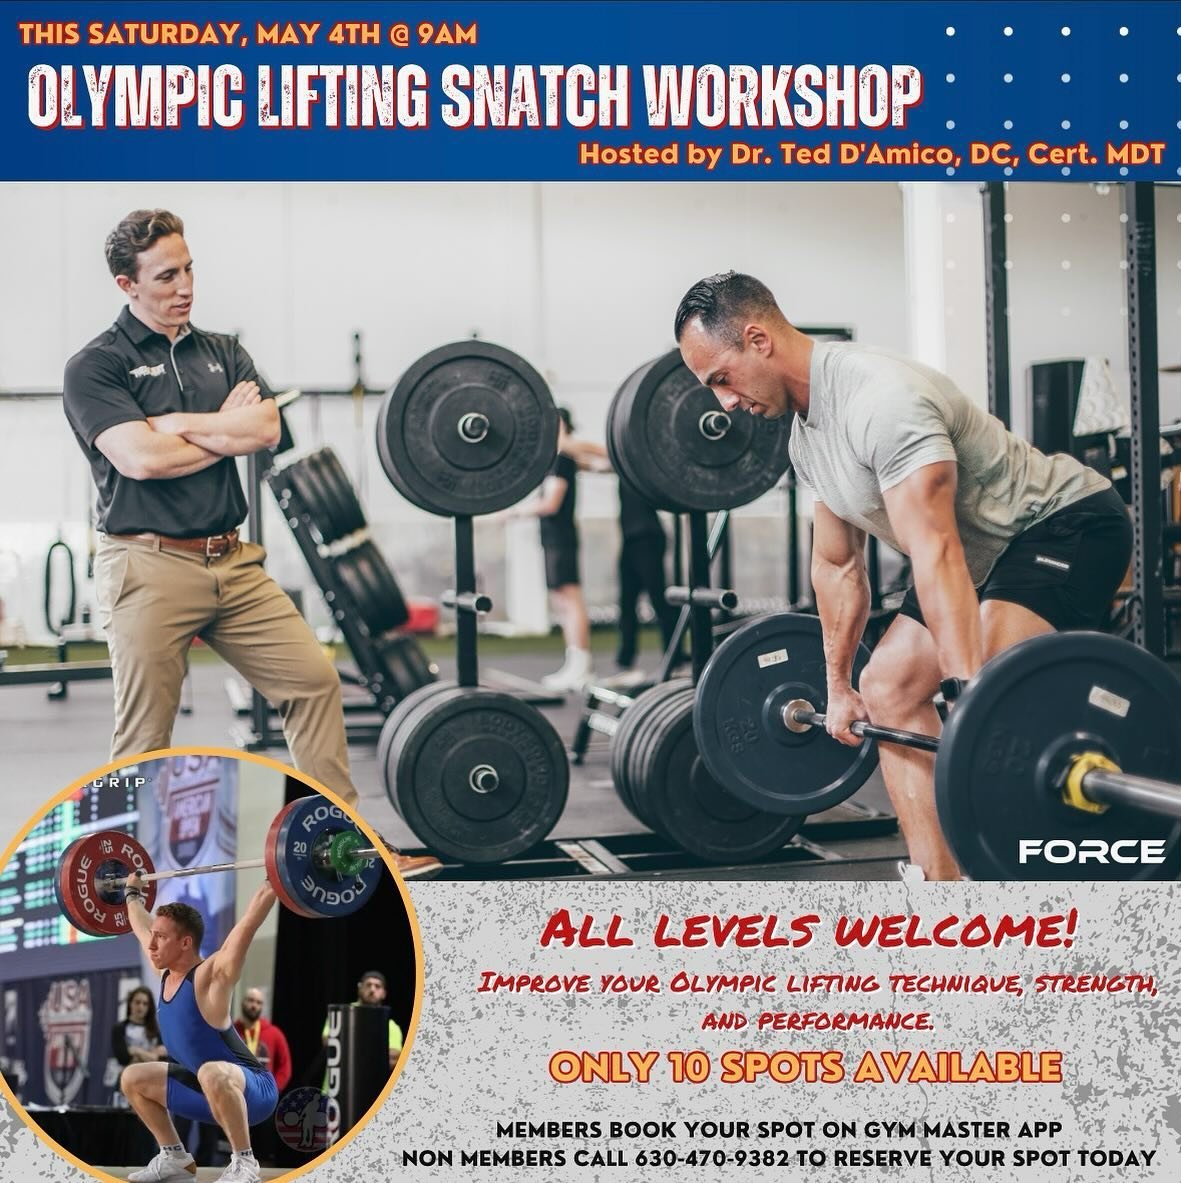 📢 Join us this Saturday at 9am for our first Olympic Weightlifting Seminar with Dr. Ted‼️

This seminar is designed for both beginners and seasoned lifters who wish to enhance their technique, strength, and overall performance in Olympic lifting. Dr